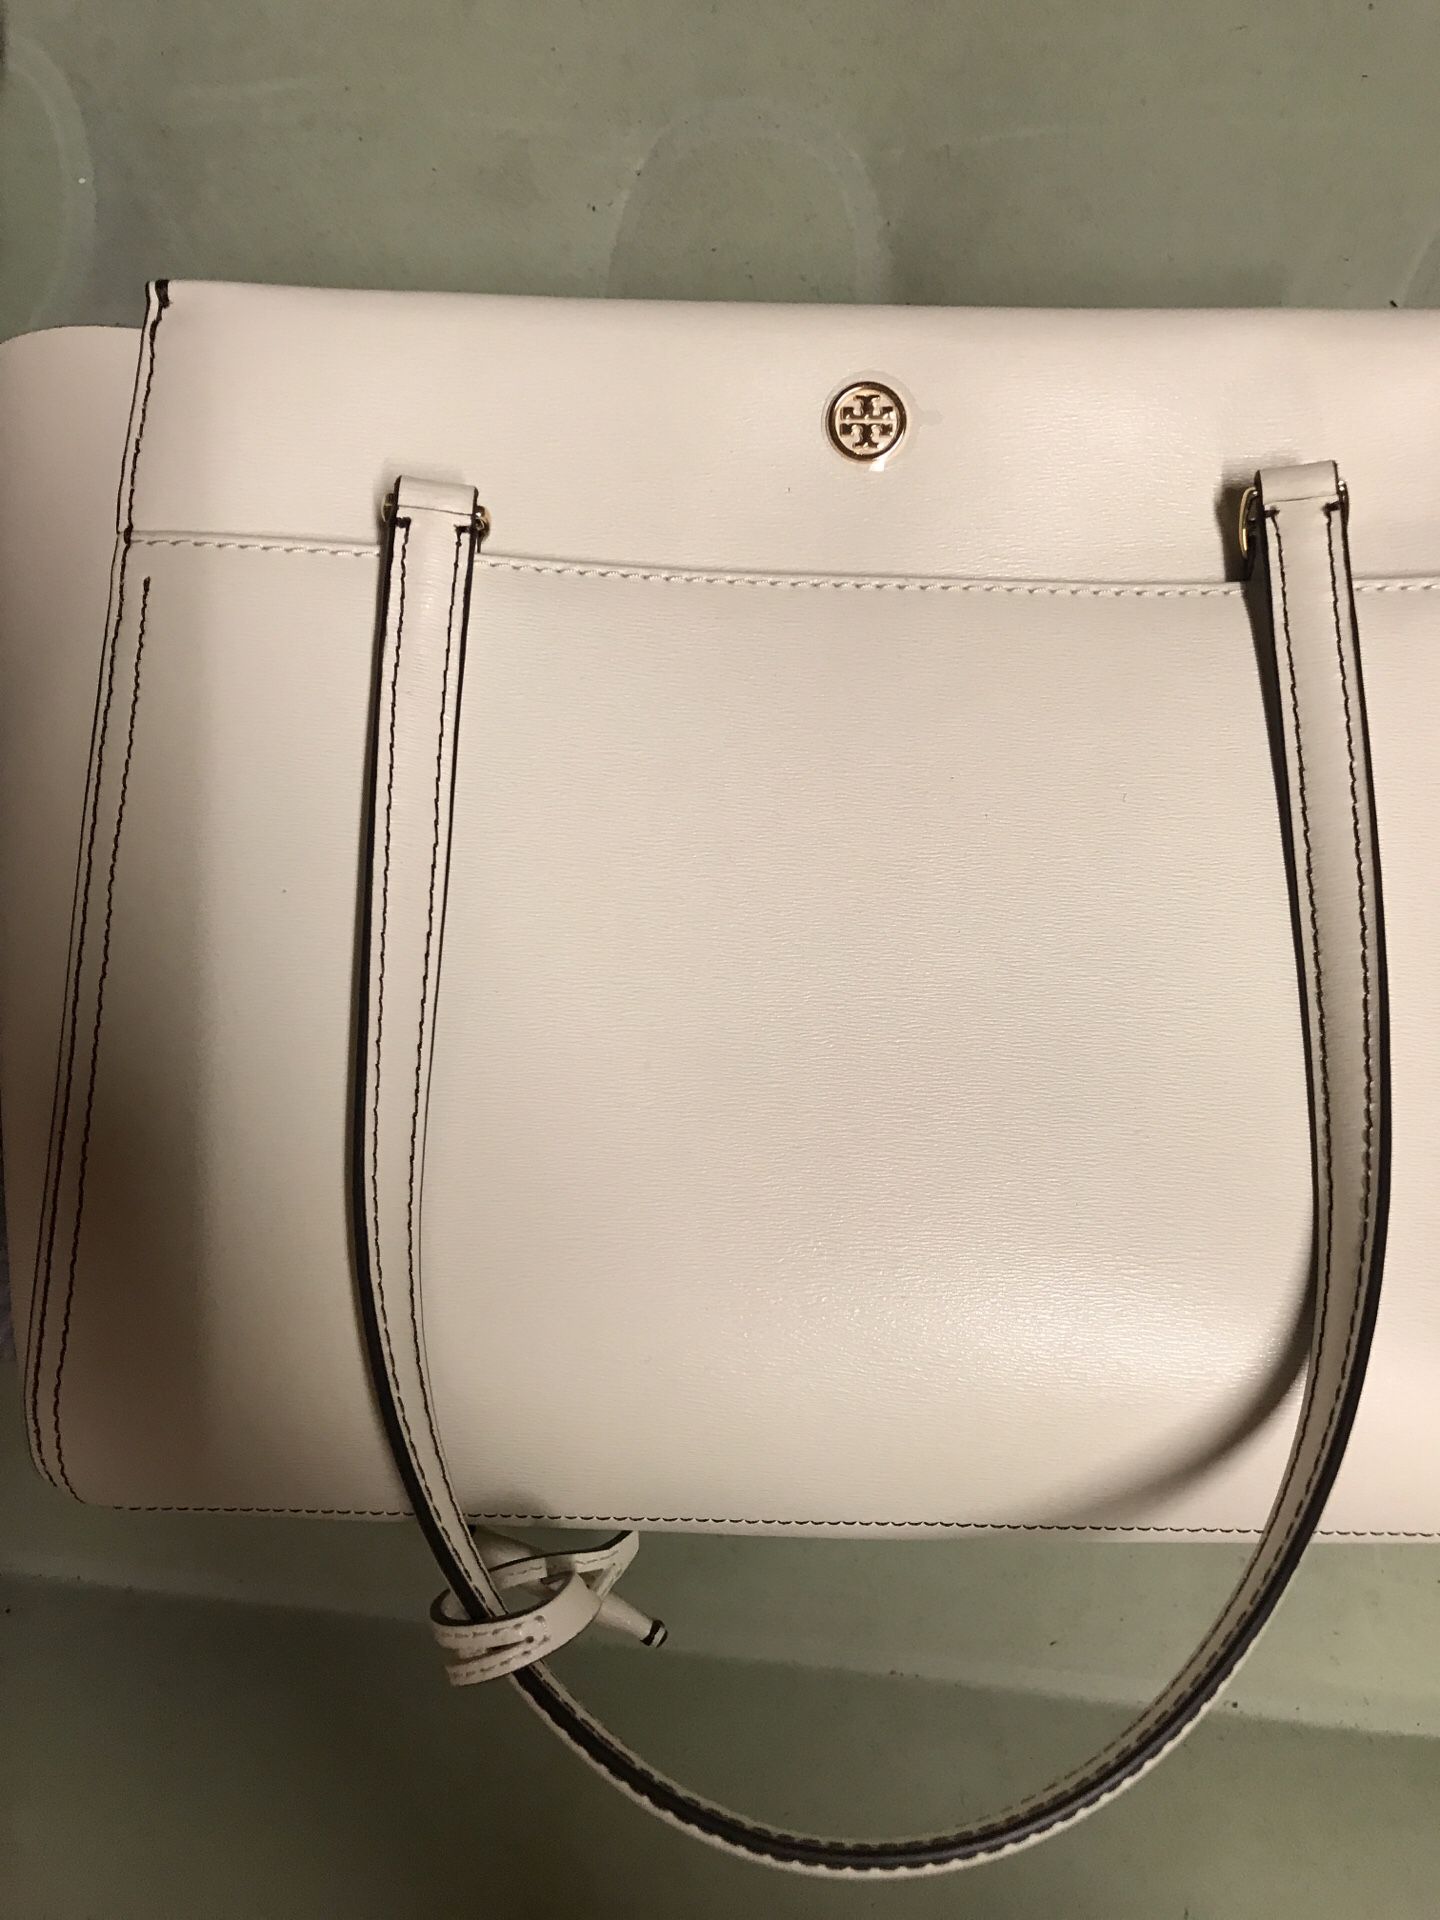 Tory Burch Purse(s) for Sale in Inglewood, CA - OfferUp